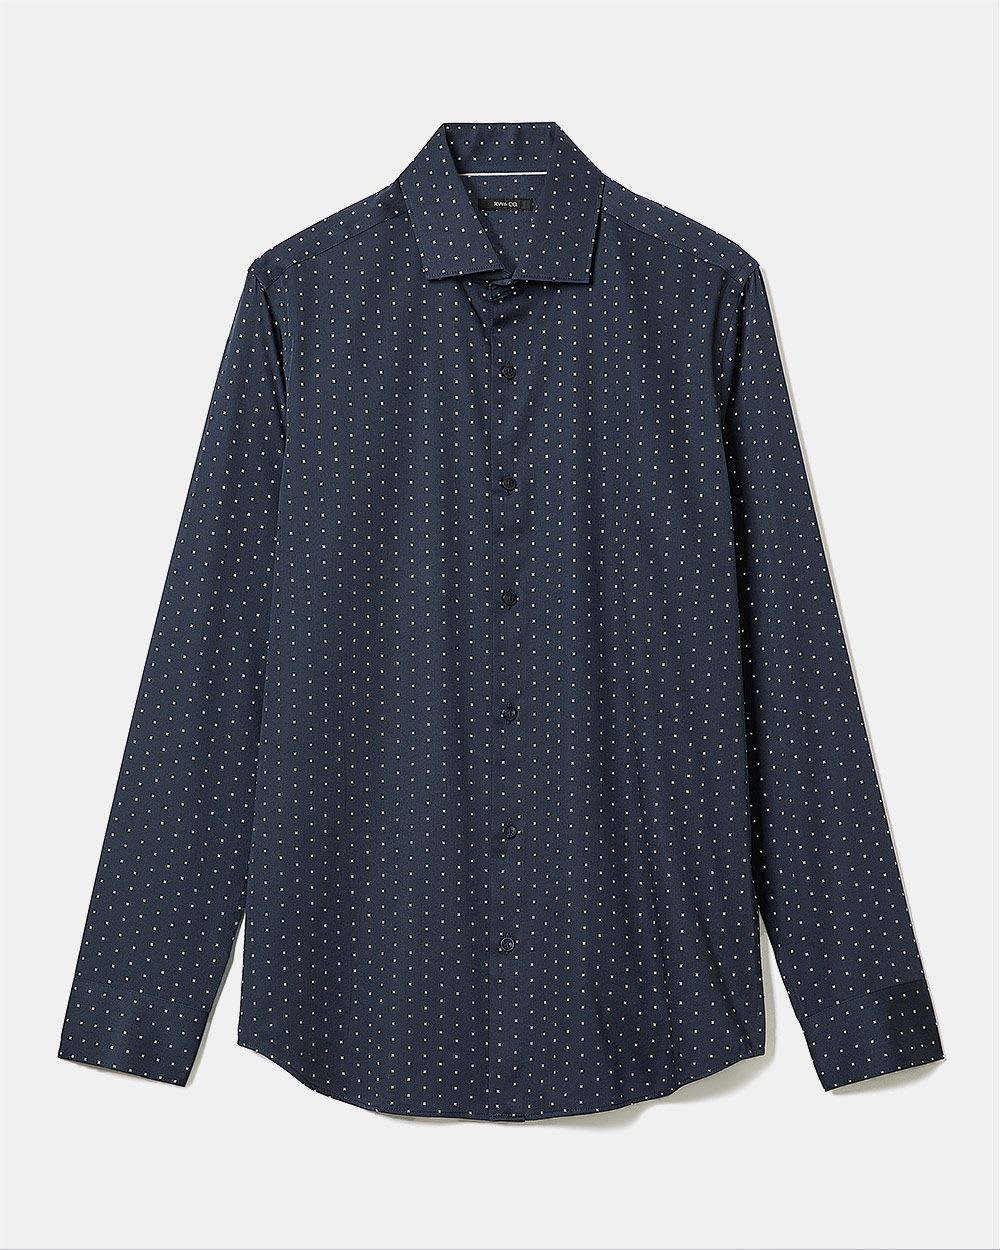 Tailored-Fit Dress Shirt with Star Pattern | RW&CO.